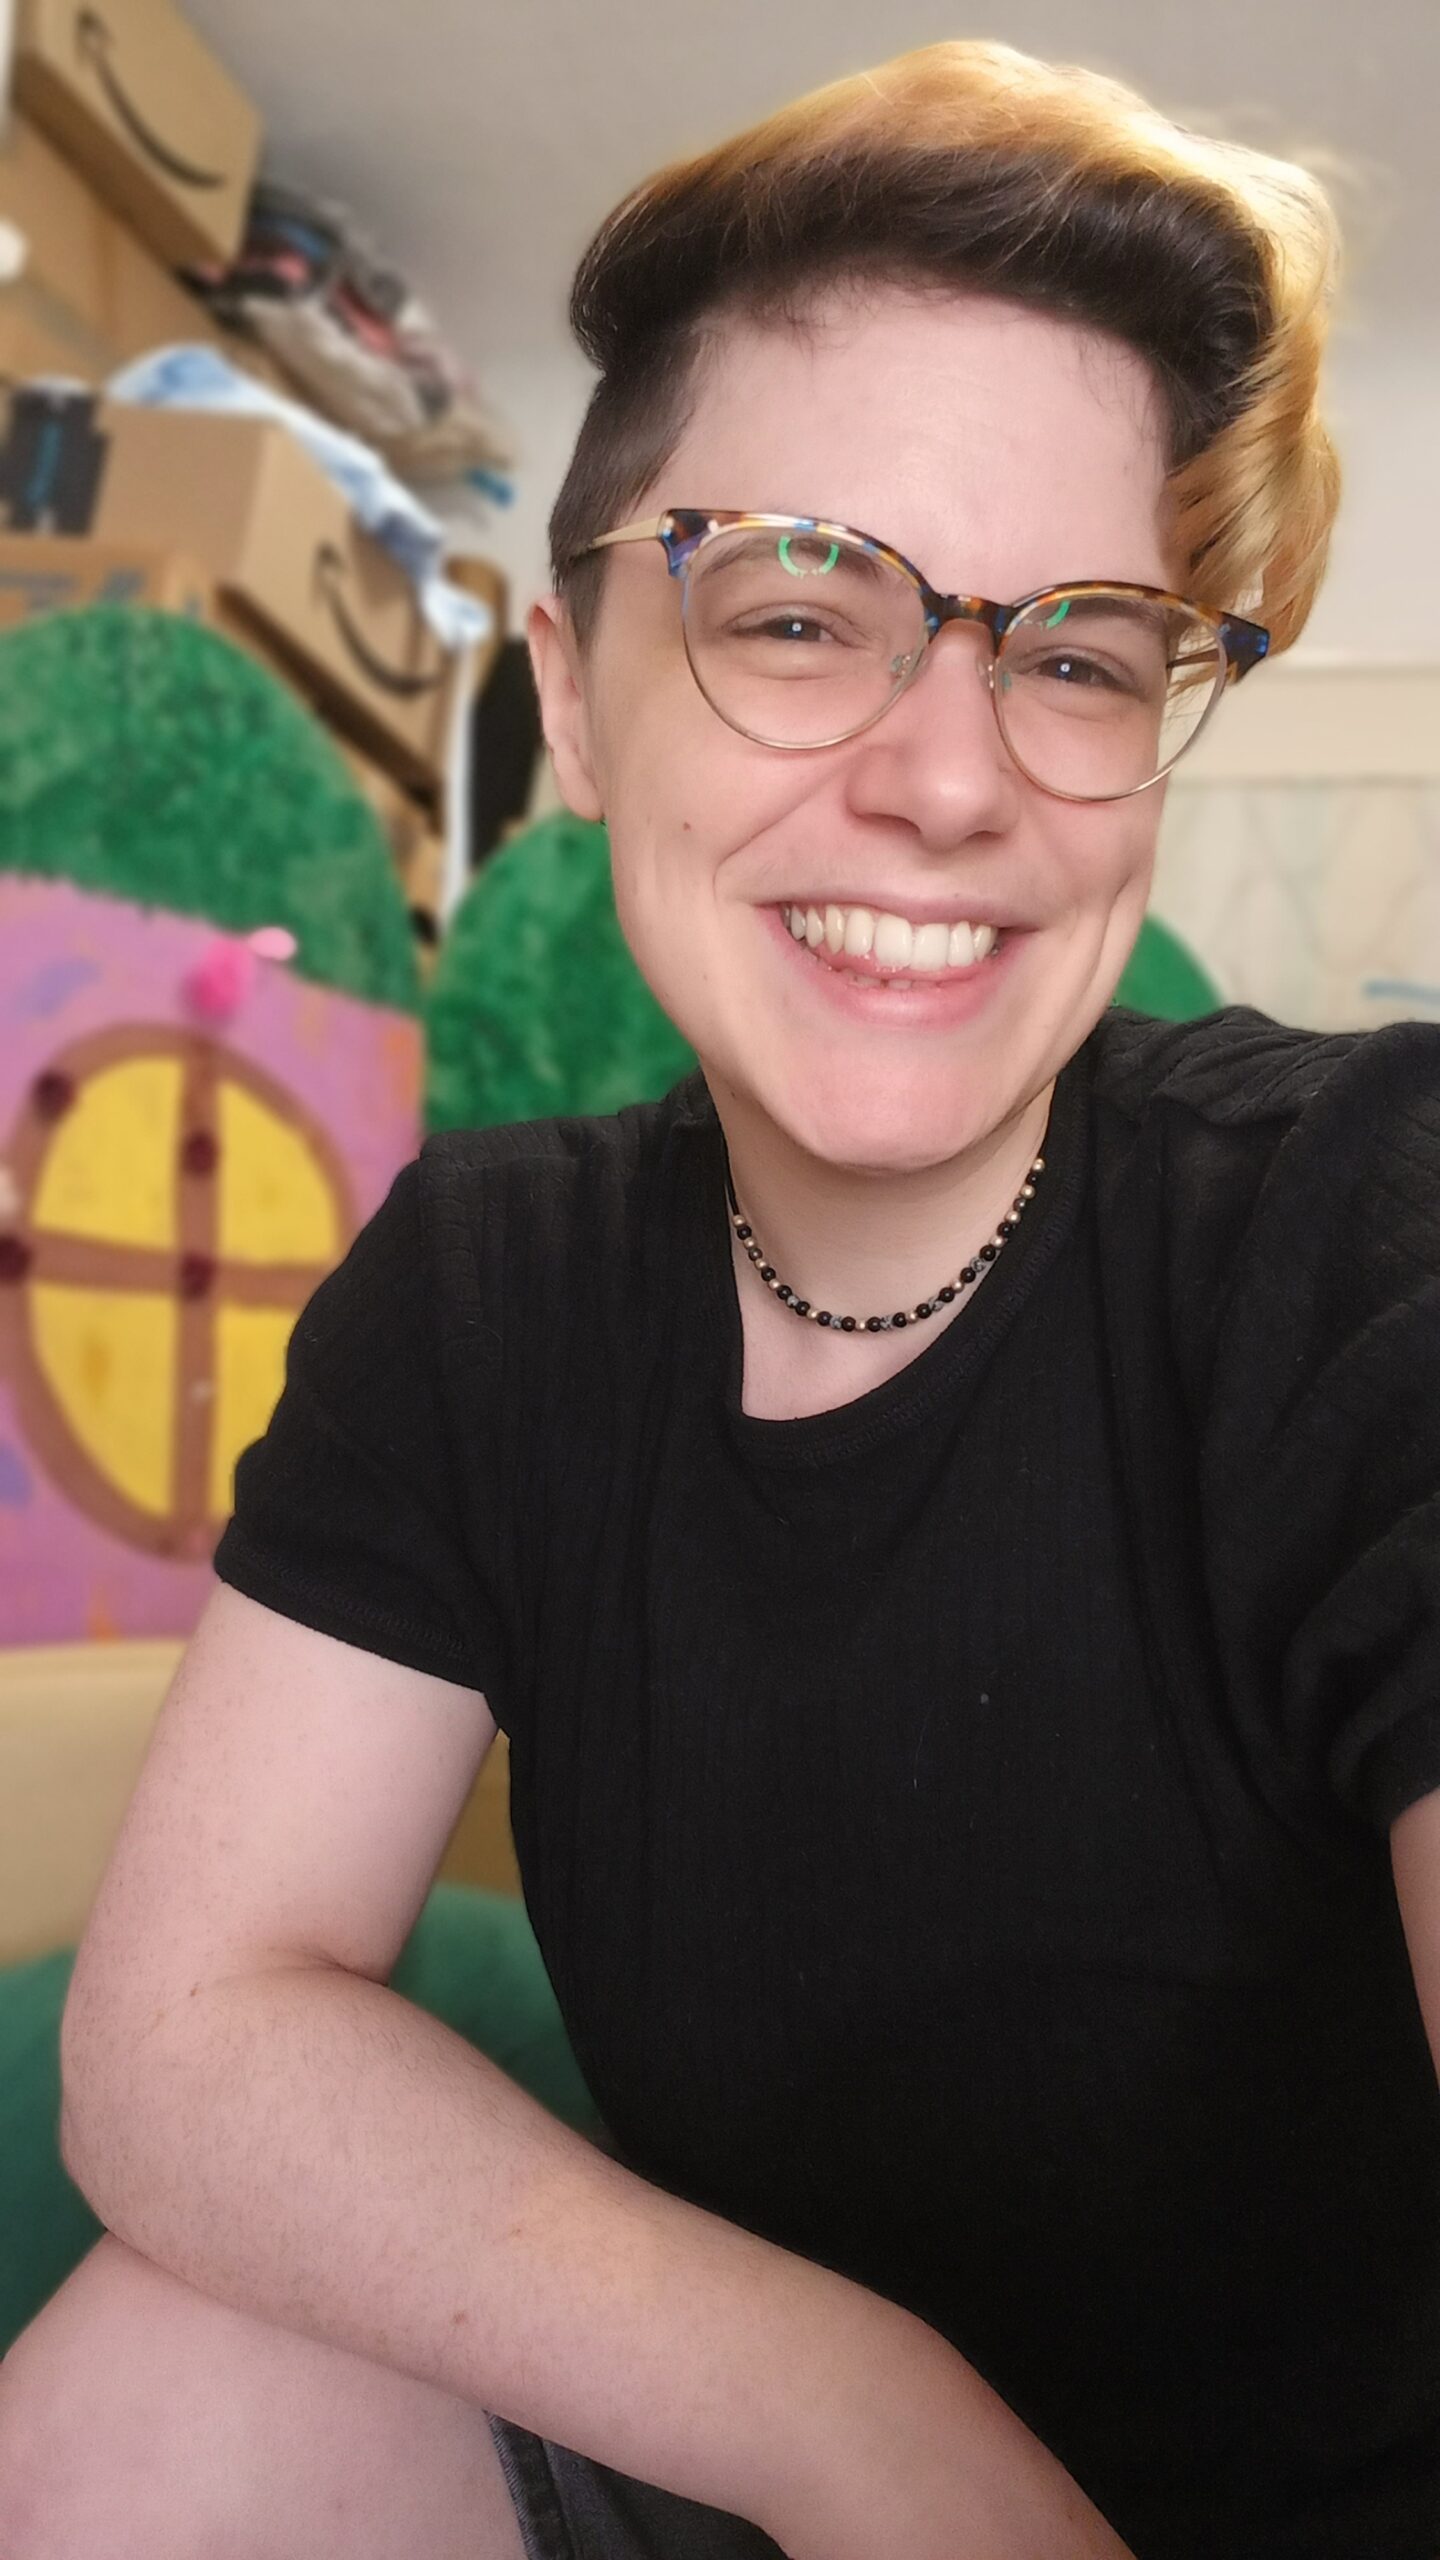 A slim white human is leaning slightly forward to the camera, with a big grin on their face. They have short blonde hair with dark brown roots which is shaved at the sides. They are wearing a black t-shirt, a small black beaded necklace, and horn-rimmed glasses.